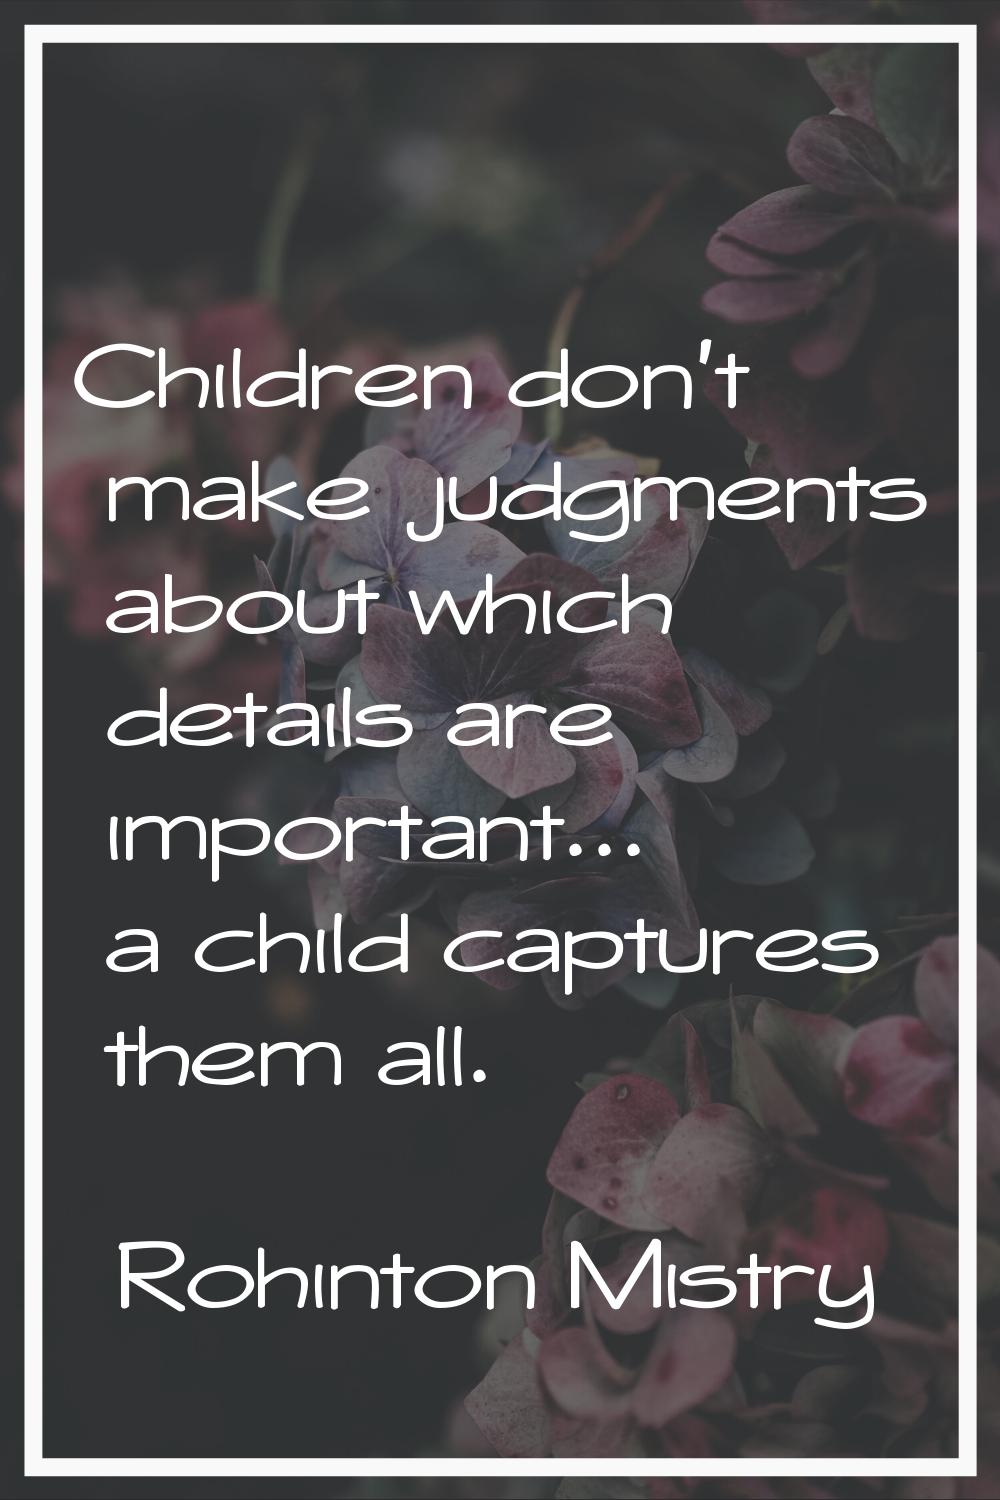 Children don't make judgments about which details are important... a child captures them all.